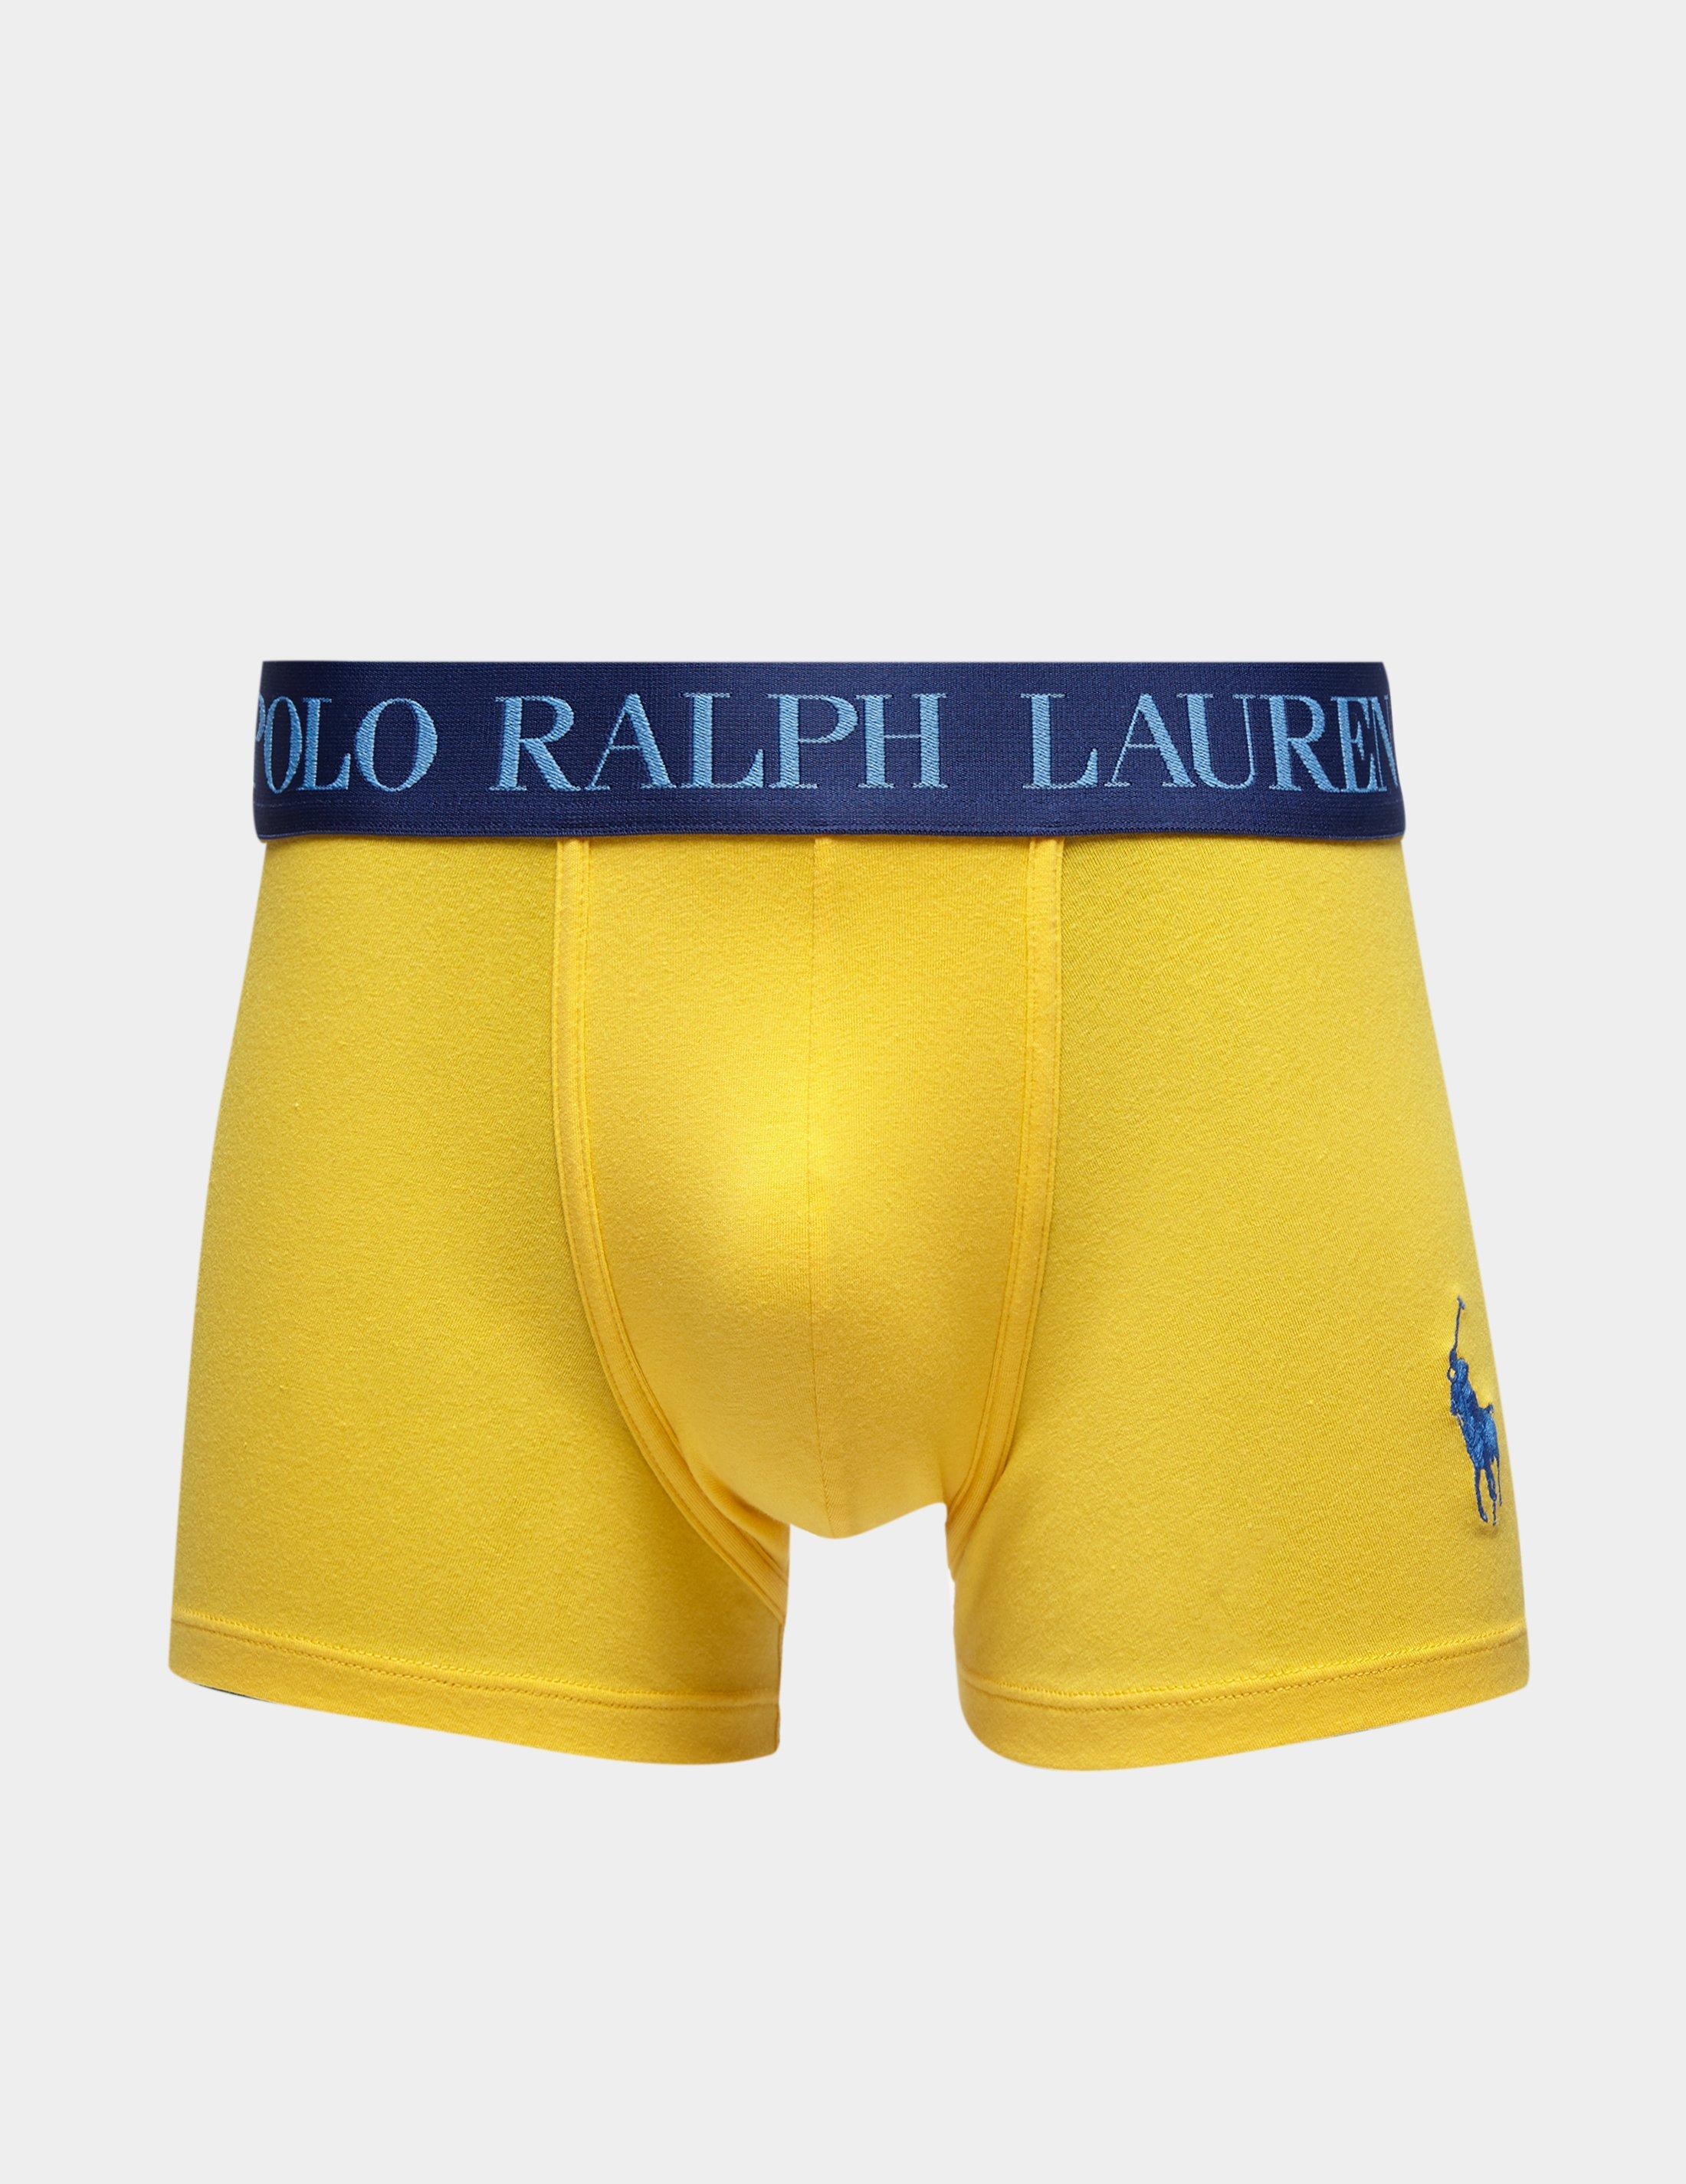 Polo Ralph Lauren Bright Boxer Shorts in Yellow for Men - Lyst